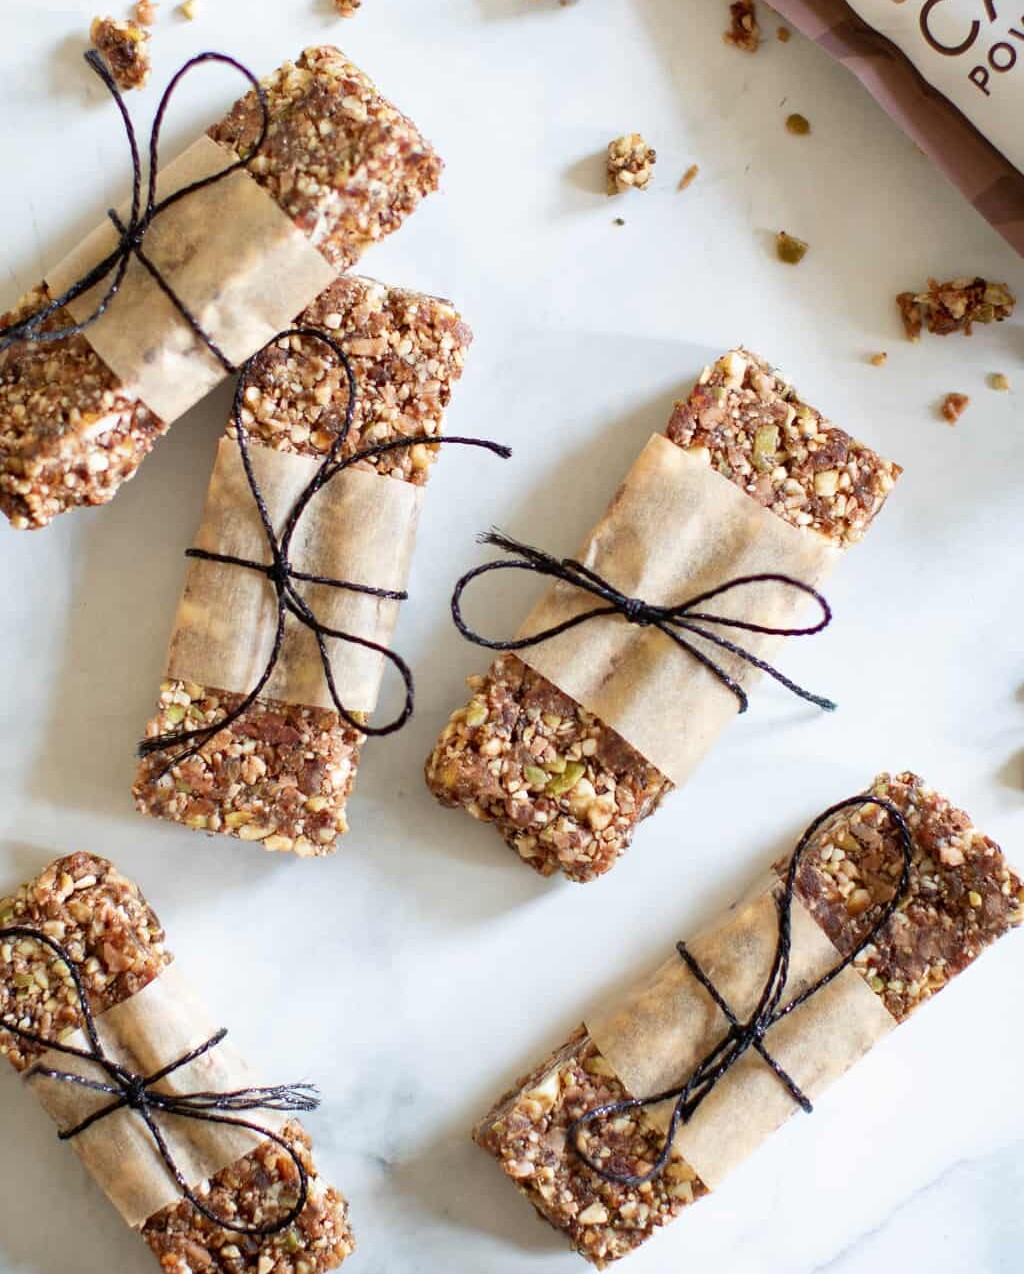 No-Bake Cacao Date Loaded Energy Bars wrapped with paper and tied with twine on a marble countertop.